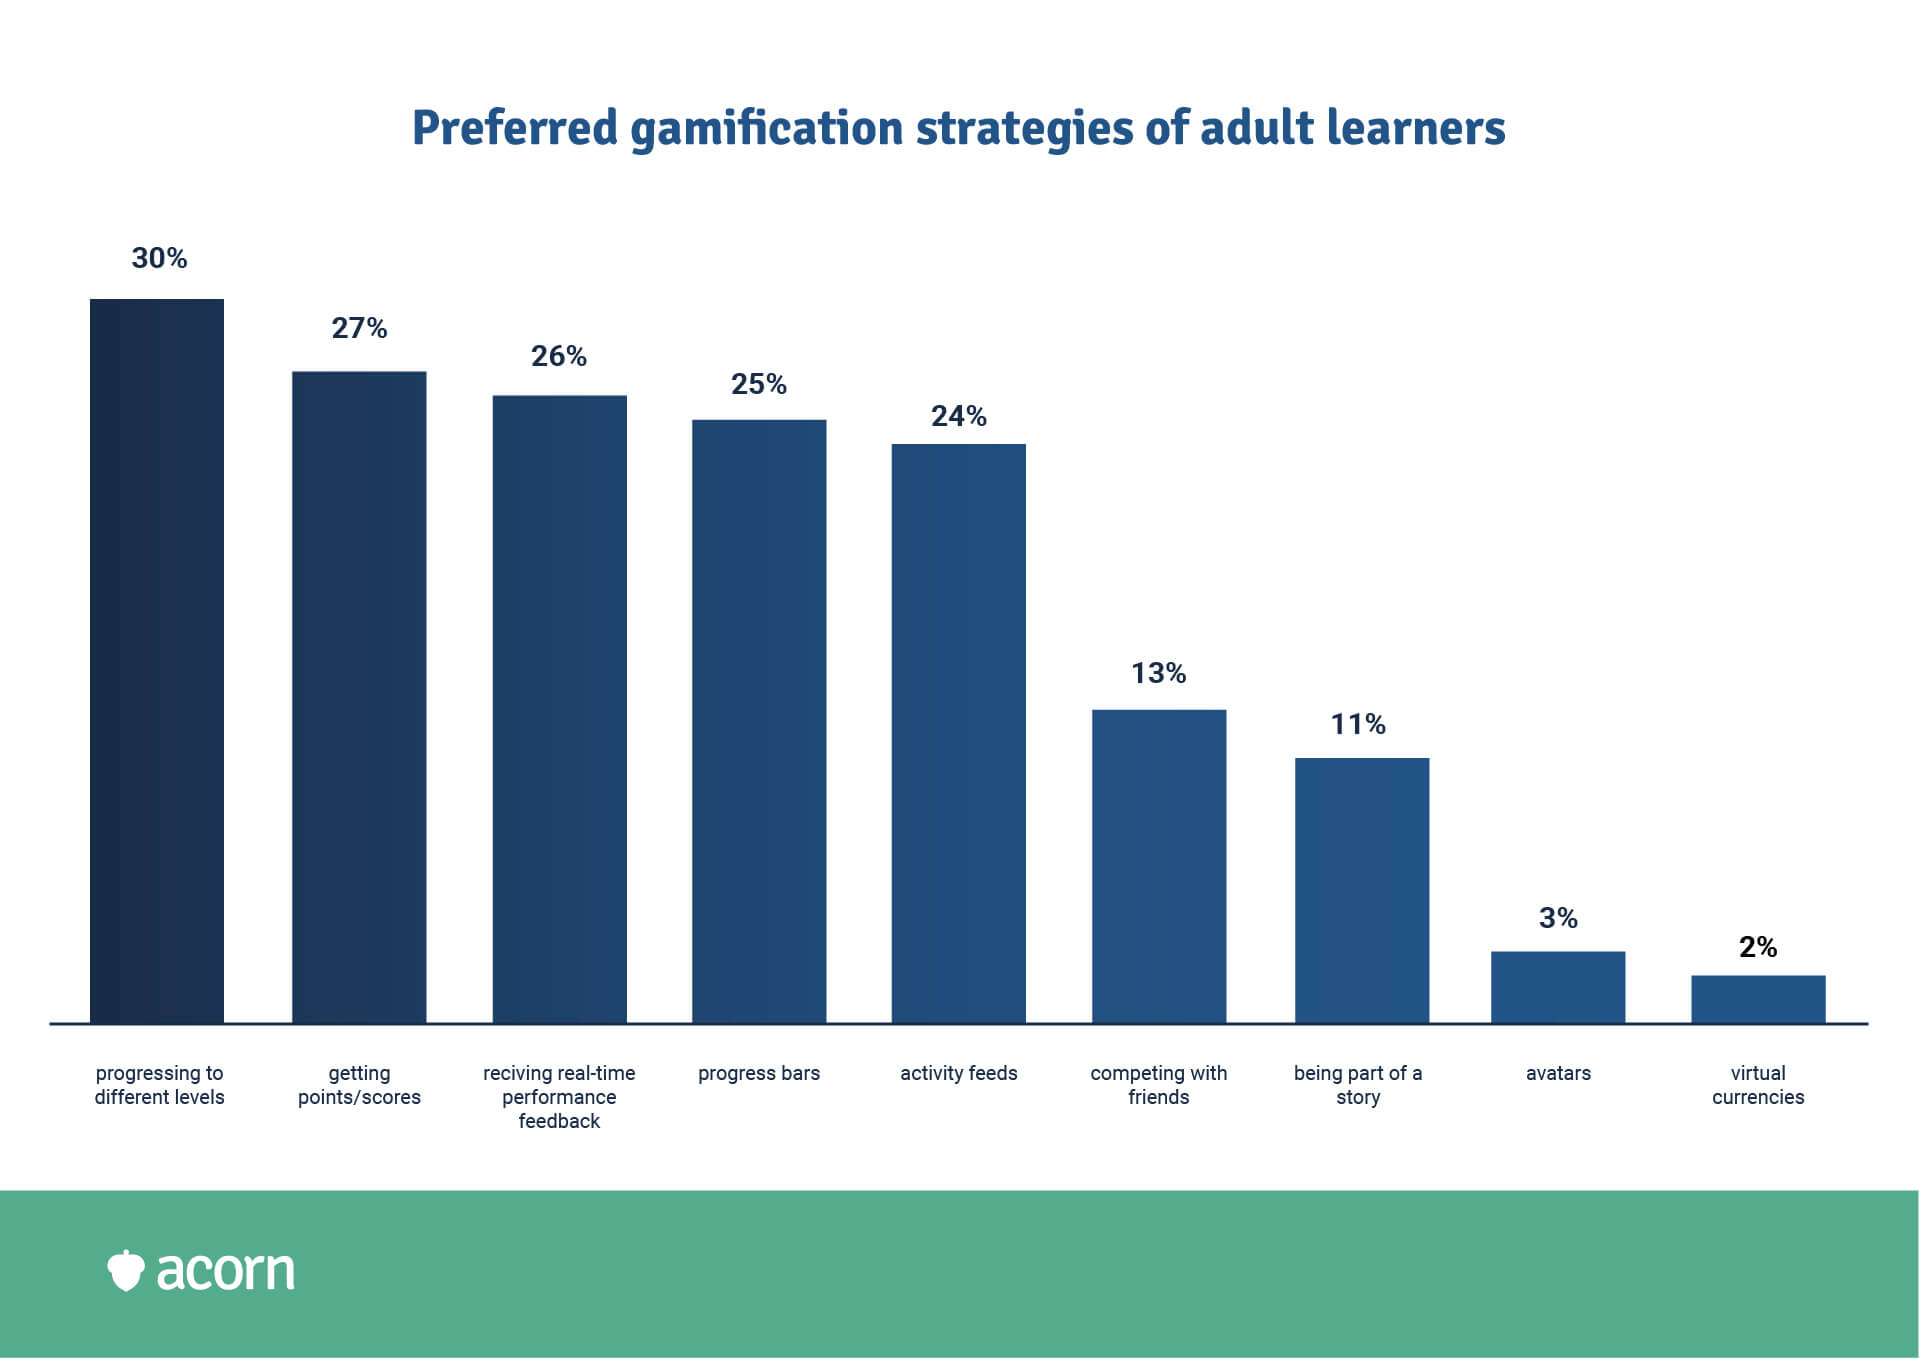 bar chart of the preferred gamification strategies of adult learners